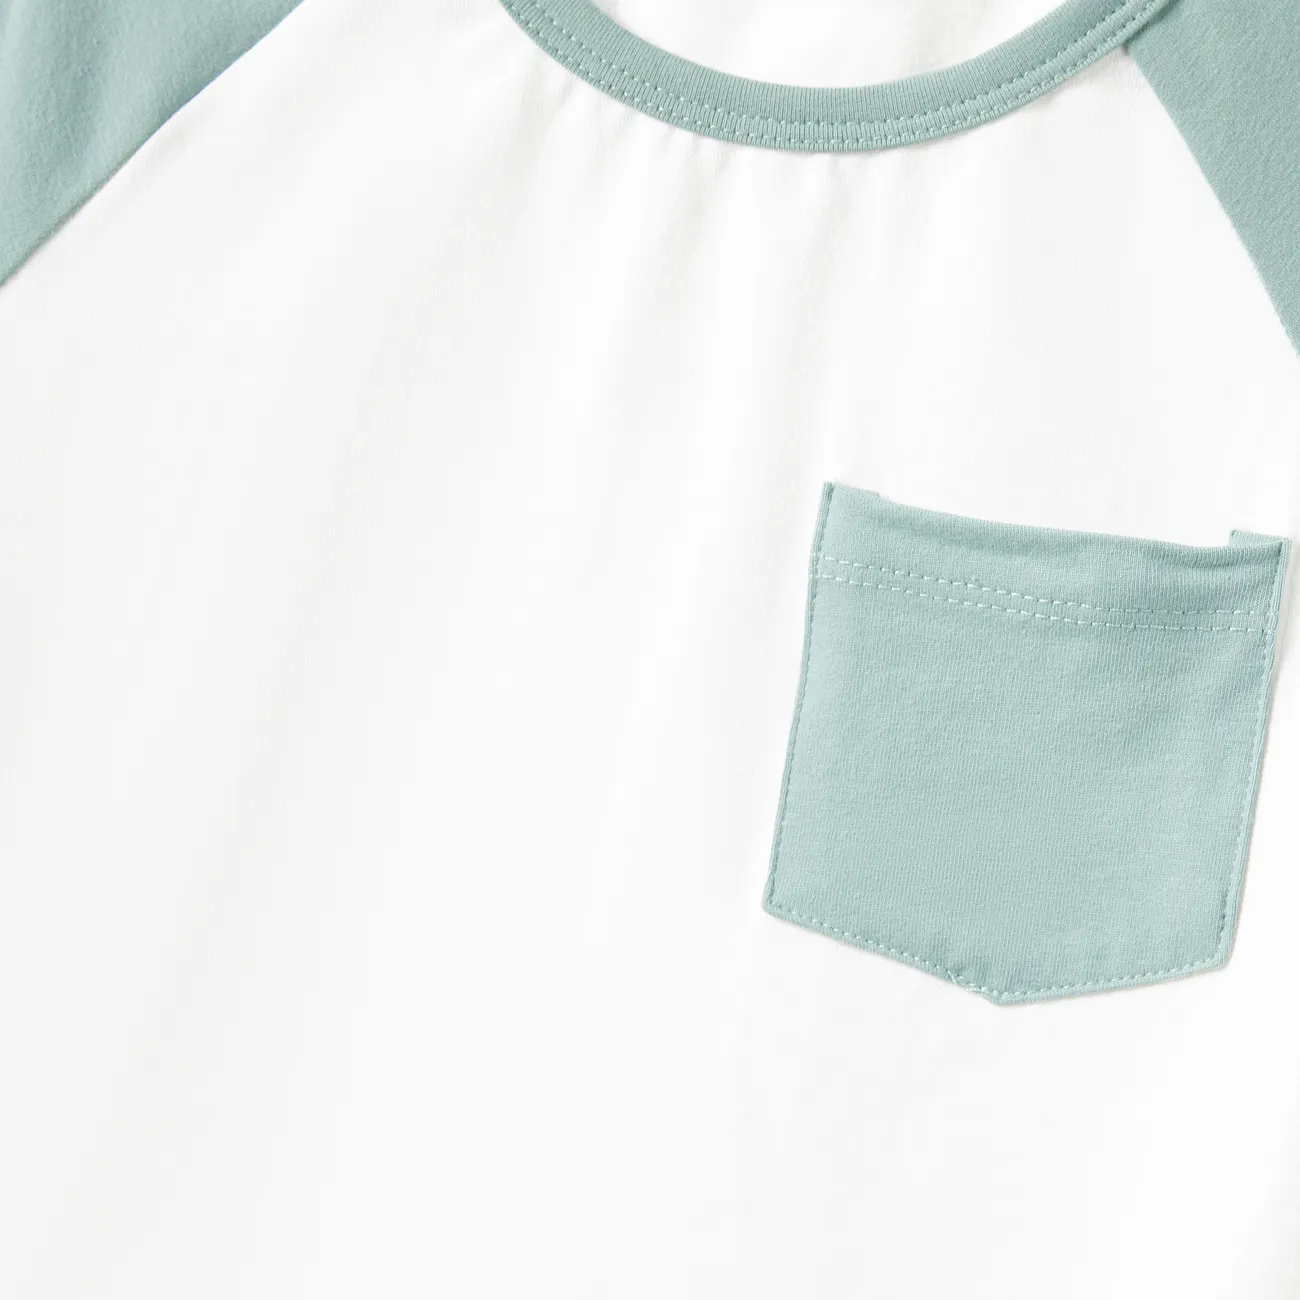 Family Matching Solid Color/ Raglan Sleeves Tee and Cami Embroidered Tulle Strap Dress Sets Pale Green big image 1